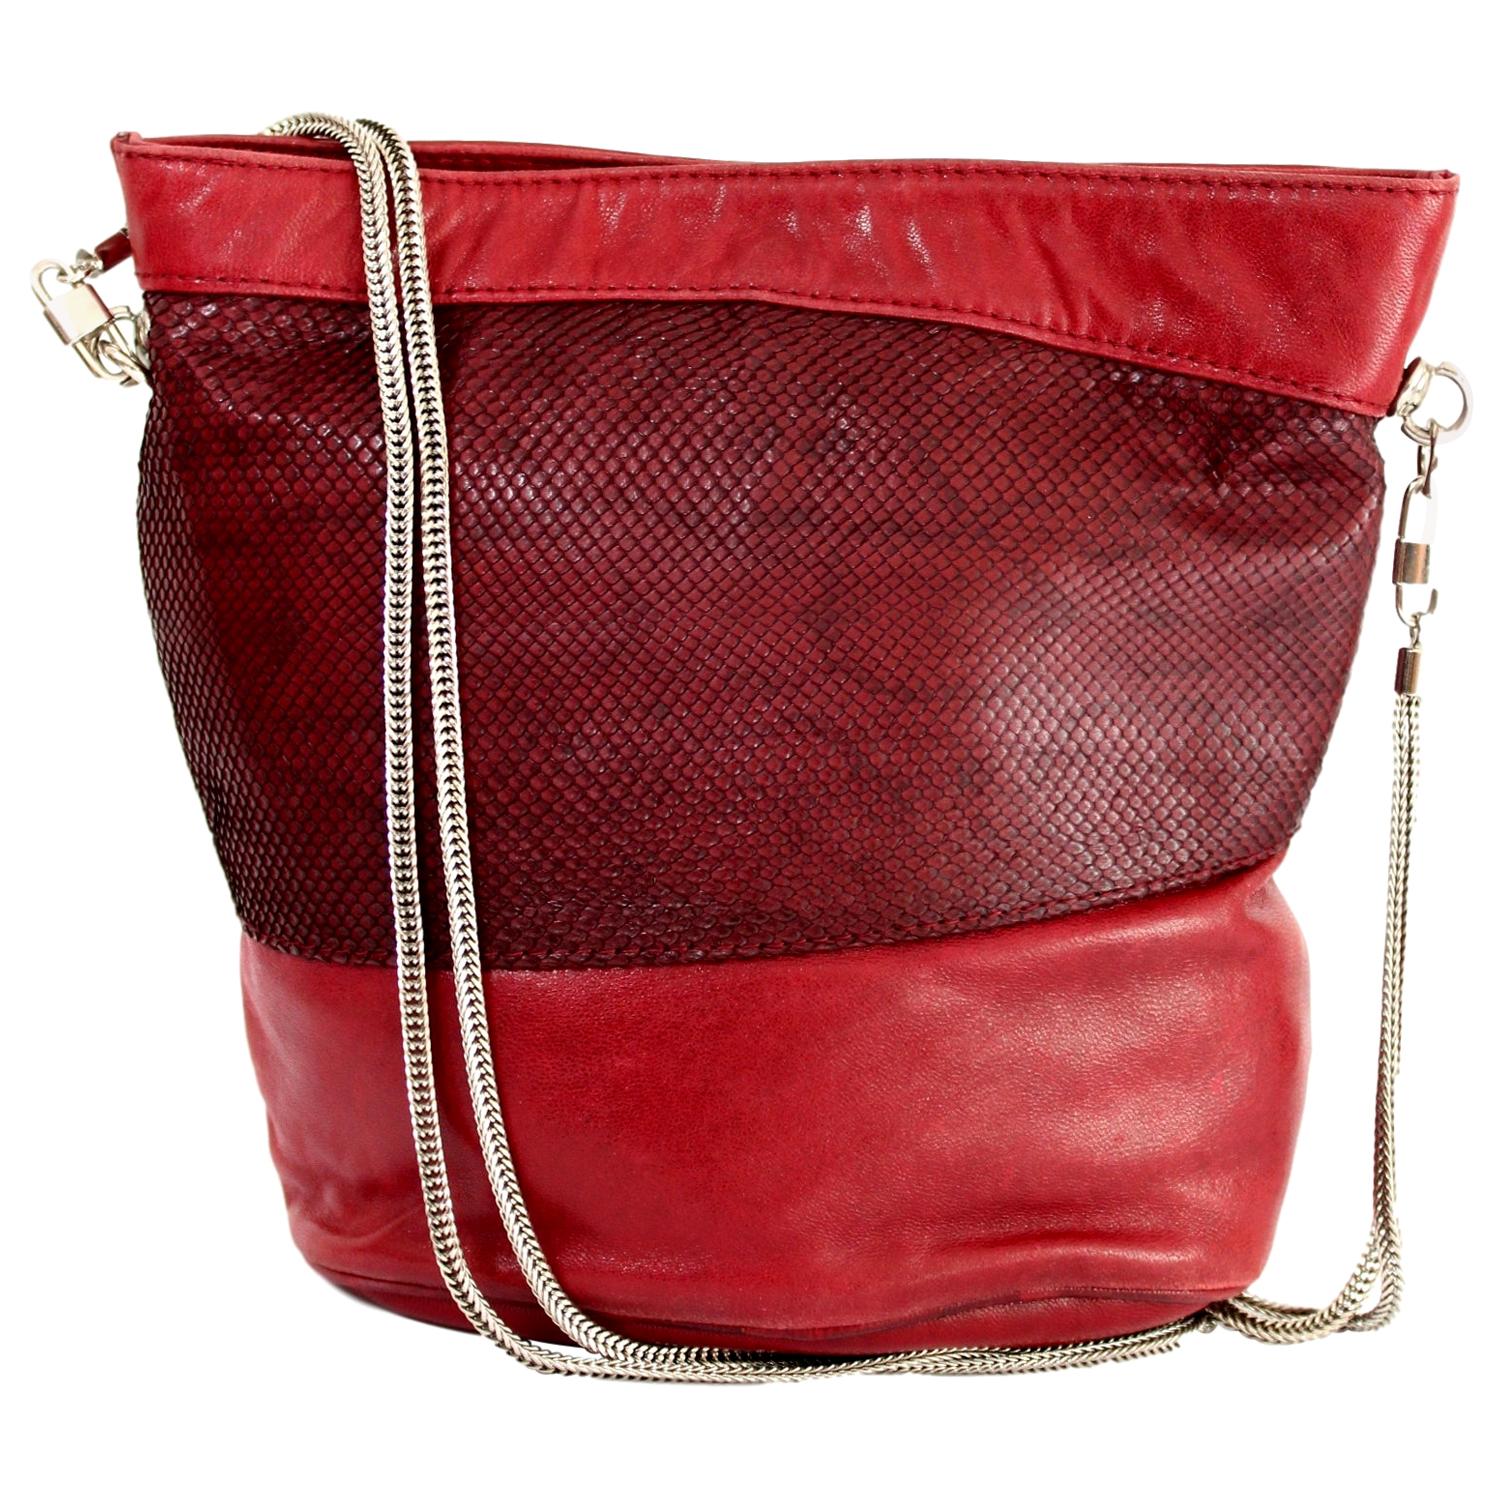 Gianni Versace Red Reptile Leather Shoulder Bucket Bag 1980s